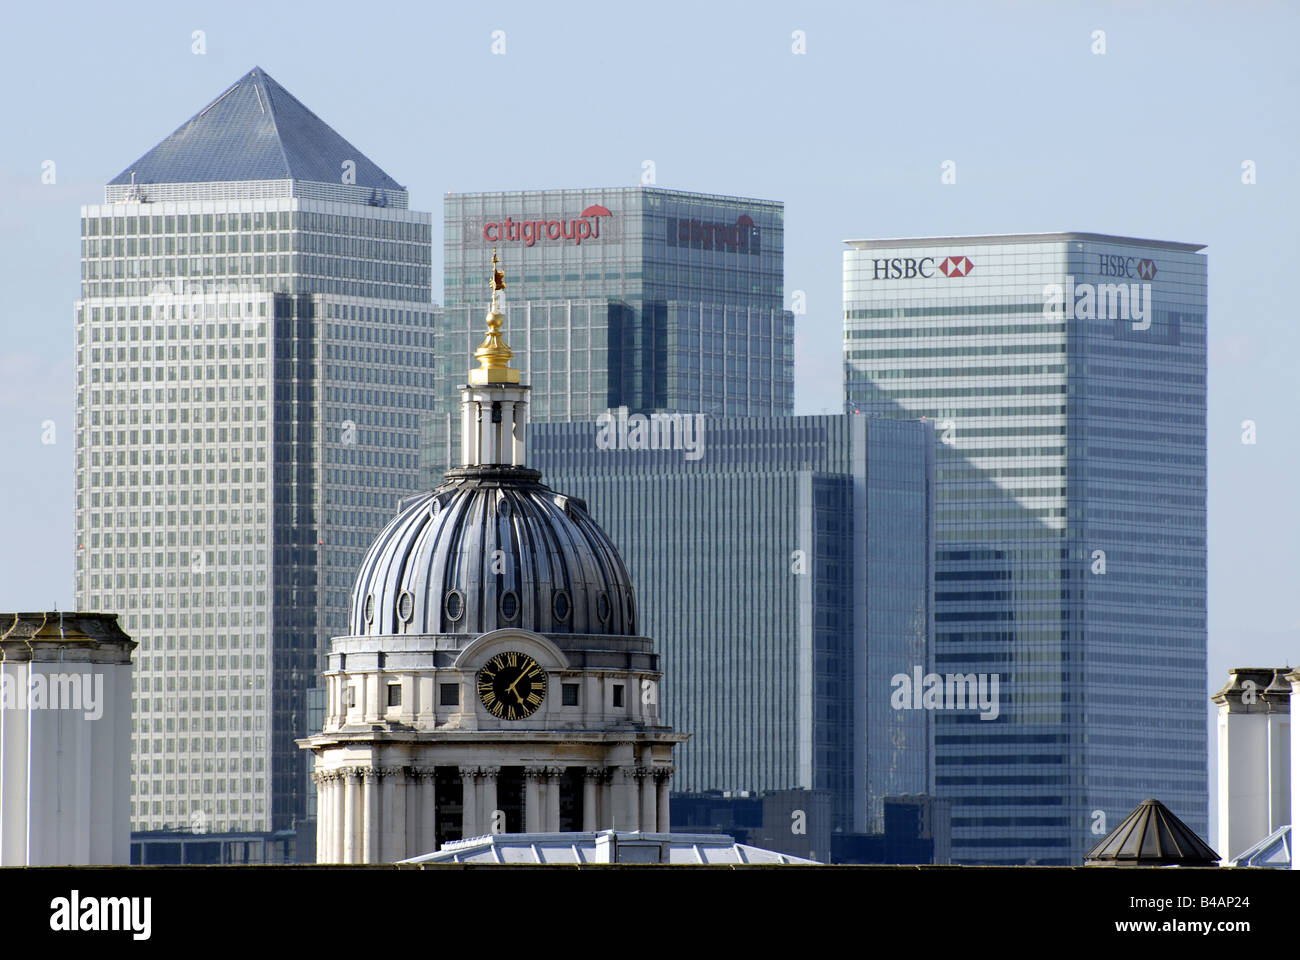 Royal Naval College & Canary Wharf Buildings From Greenwich Park London. Stock Photo